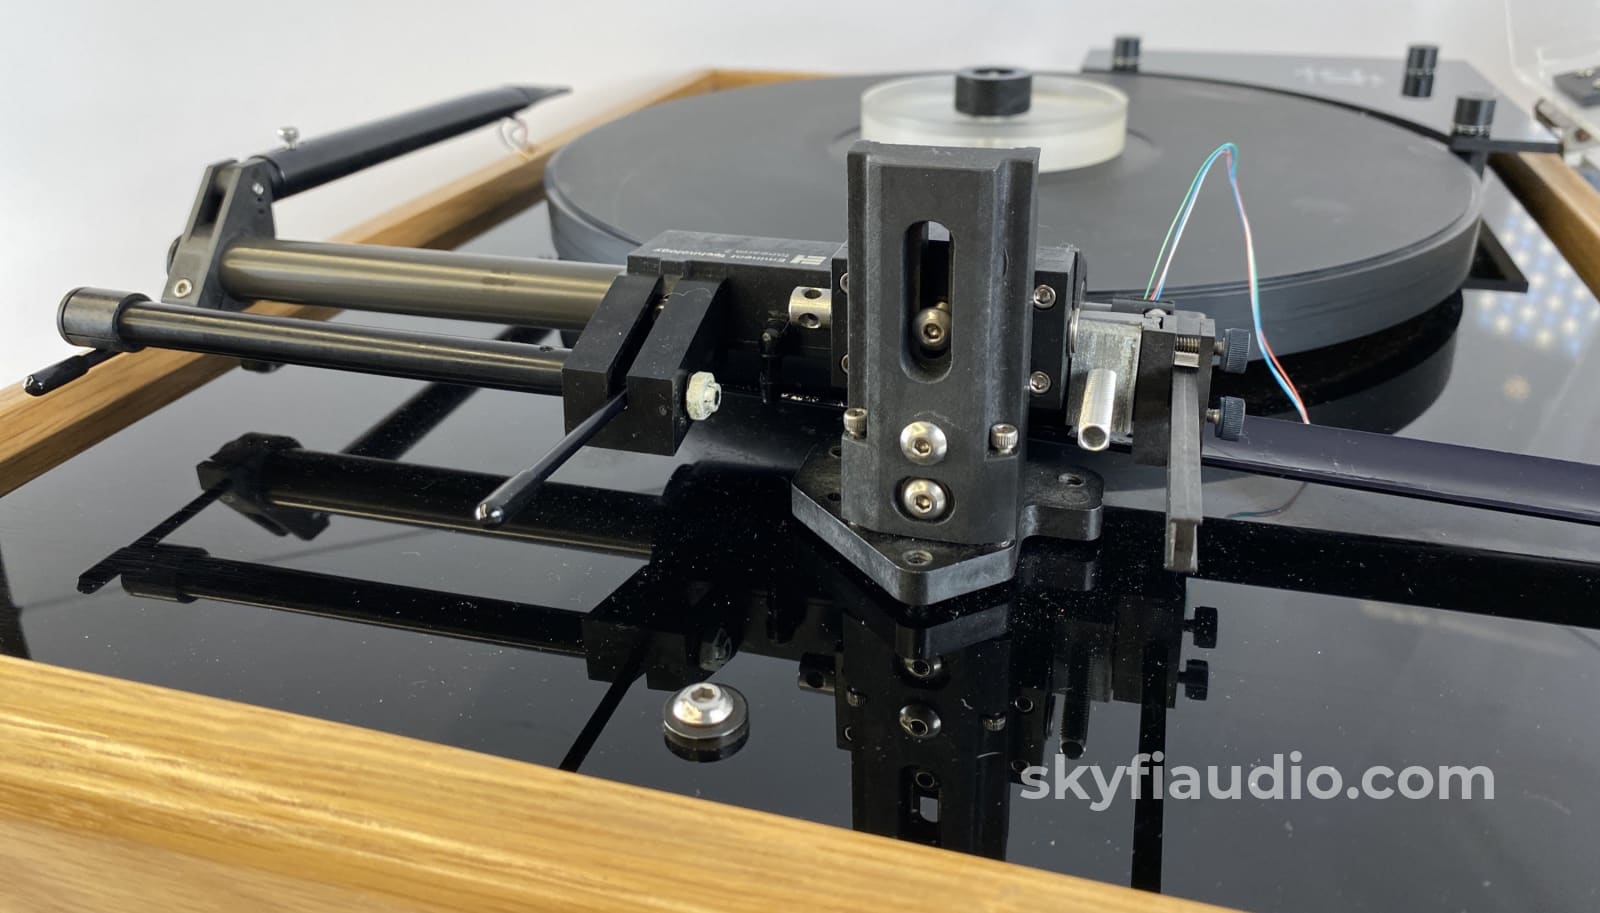 Vpi Hw-19 Turntable With Tangential Tonearm And Pump - In Light Oak With New Sumiko Cartridge